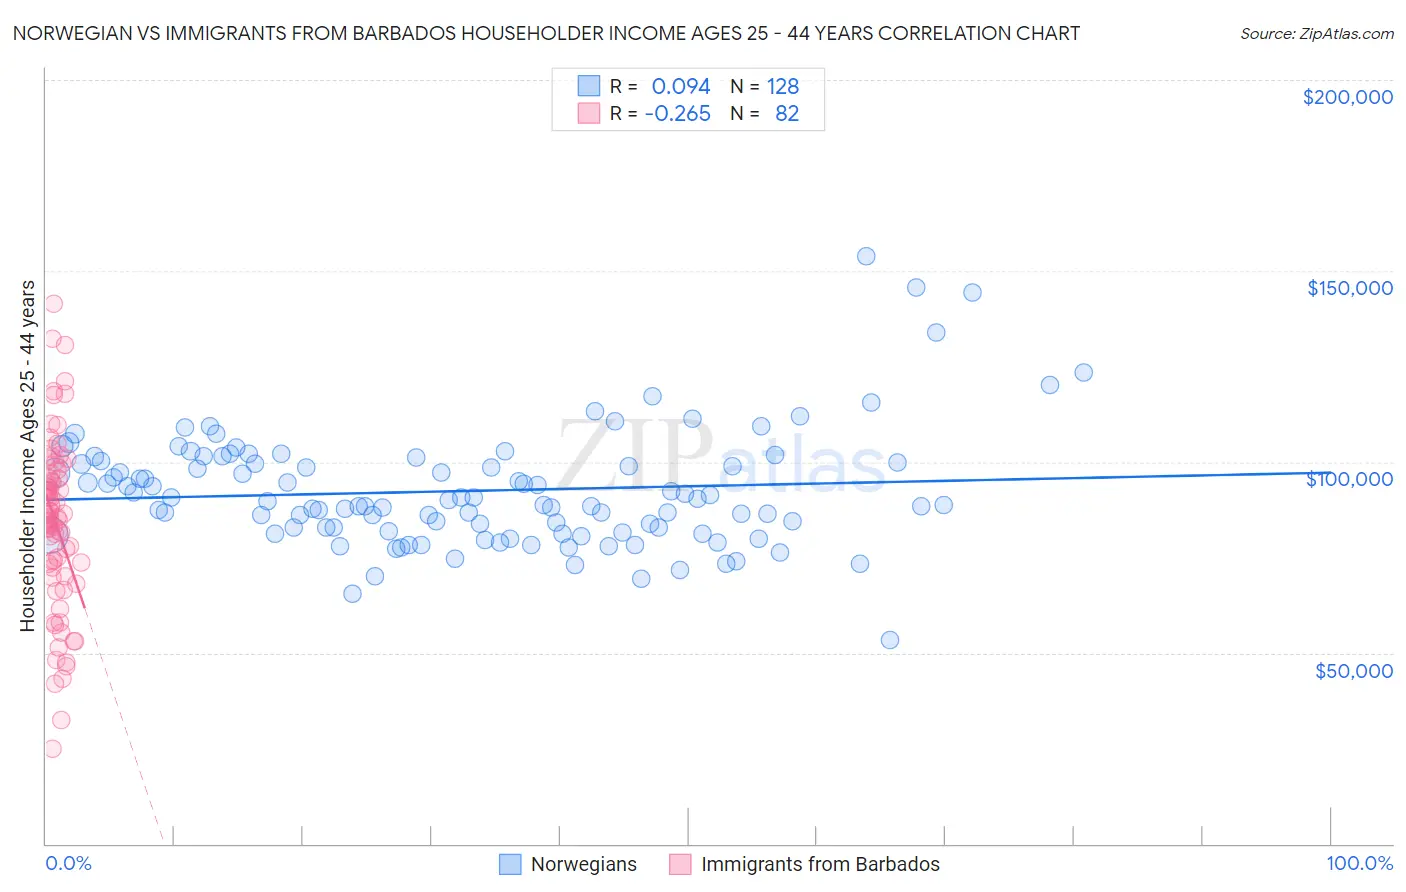 Norwegian vs Immigrants from Barbados Householder Income Ages 25 - 44 years